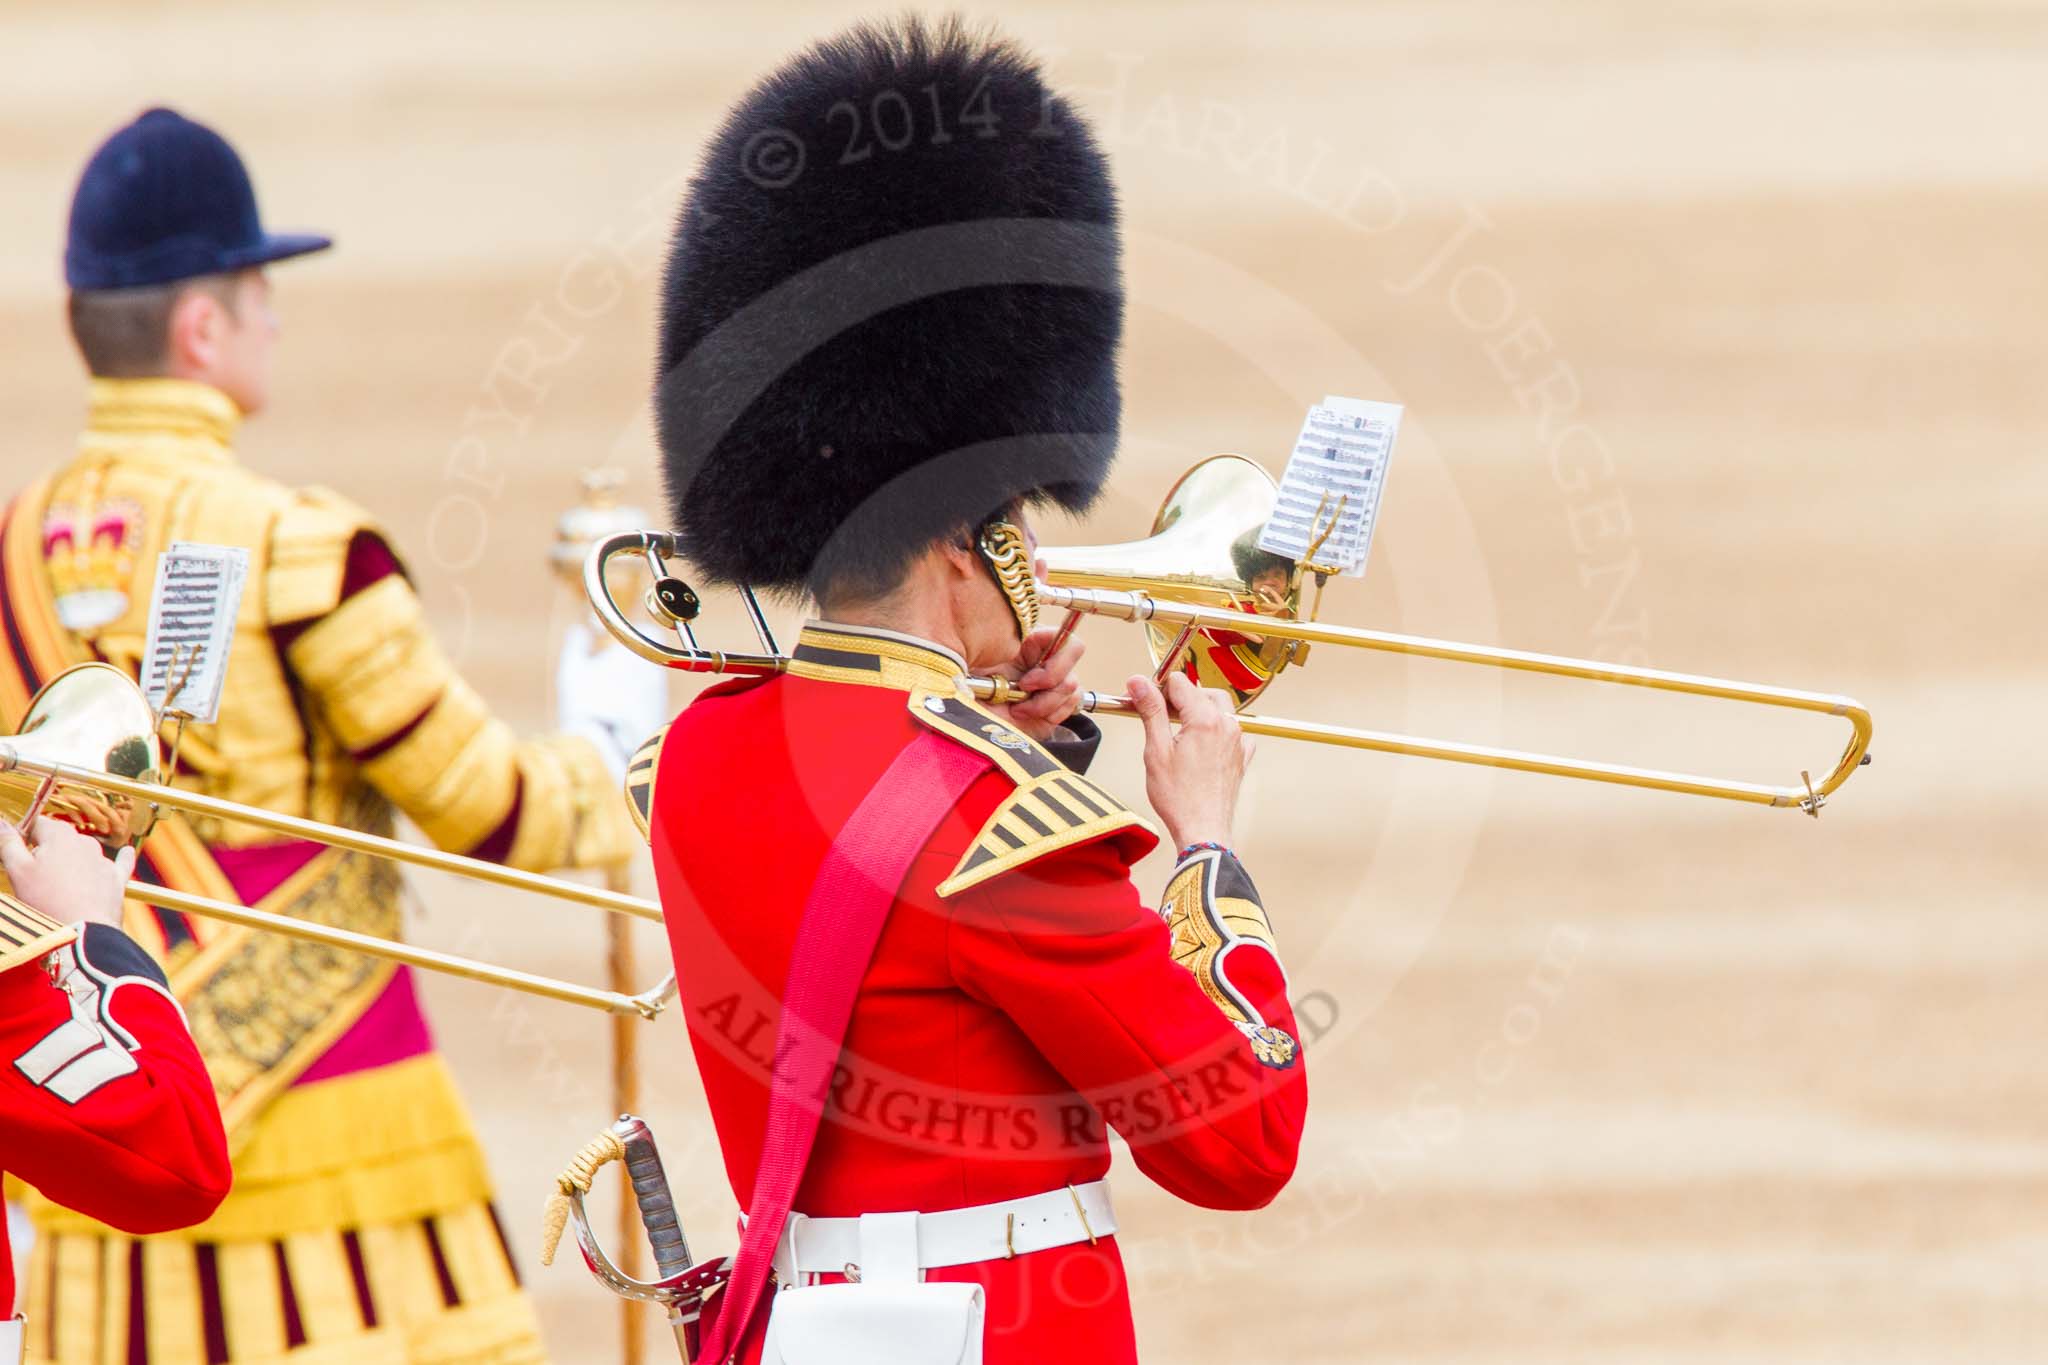 Trooping the Colour 2014.
Horse Guards Parade, Westminster,
London SW1A,

United Kingdom,
on 14 June 2014 at 11:15, image #488